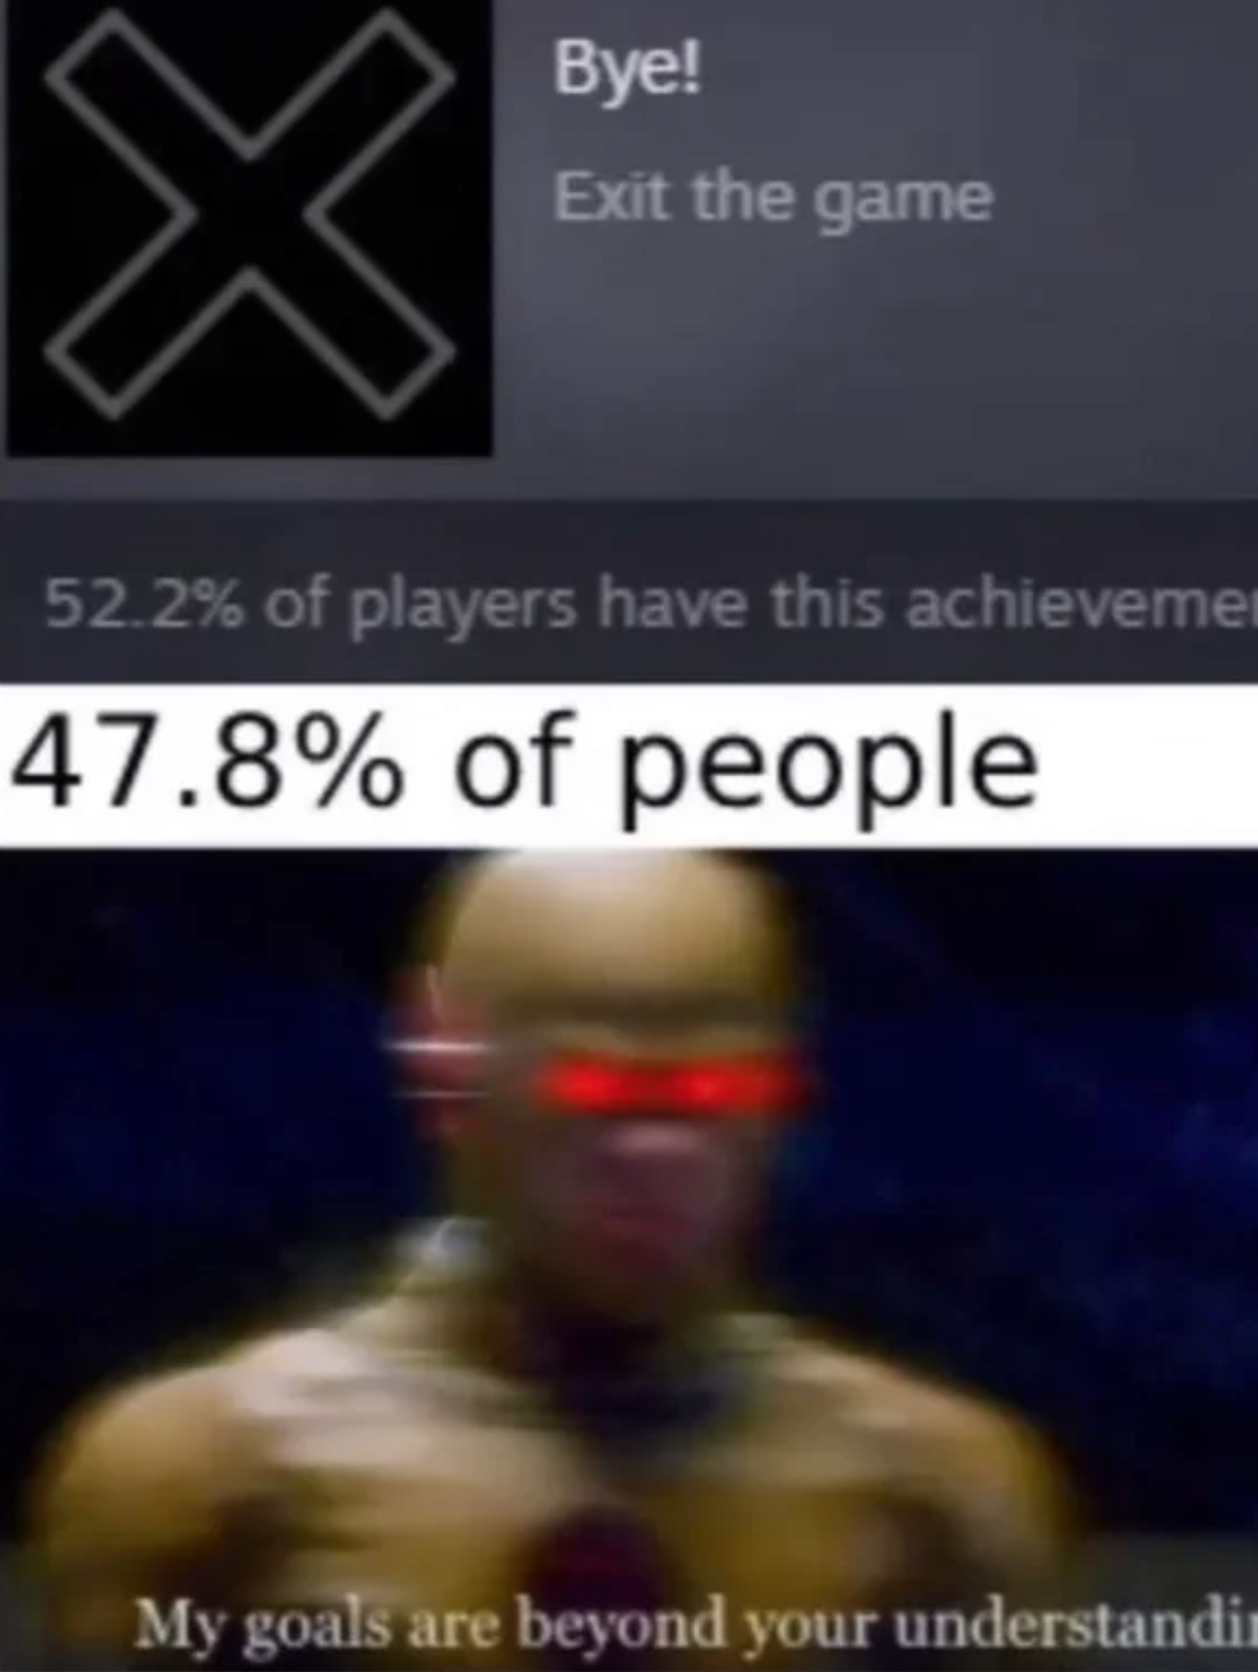 funny gaming memes - screenshot - Bye! X Exit the game 52.2% of players have this achievemen 47.8% of people My goals are beyond your understandi